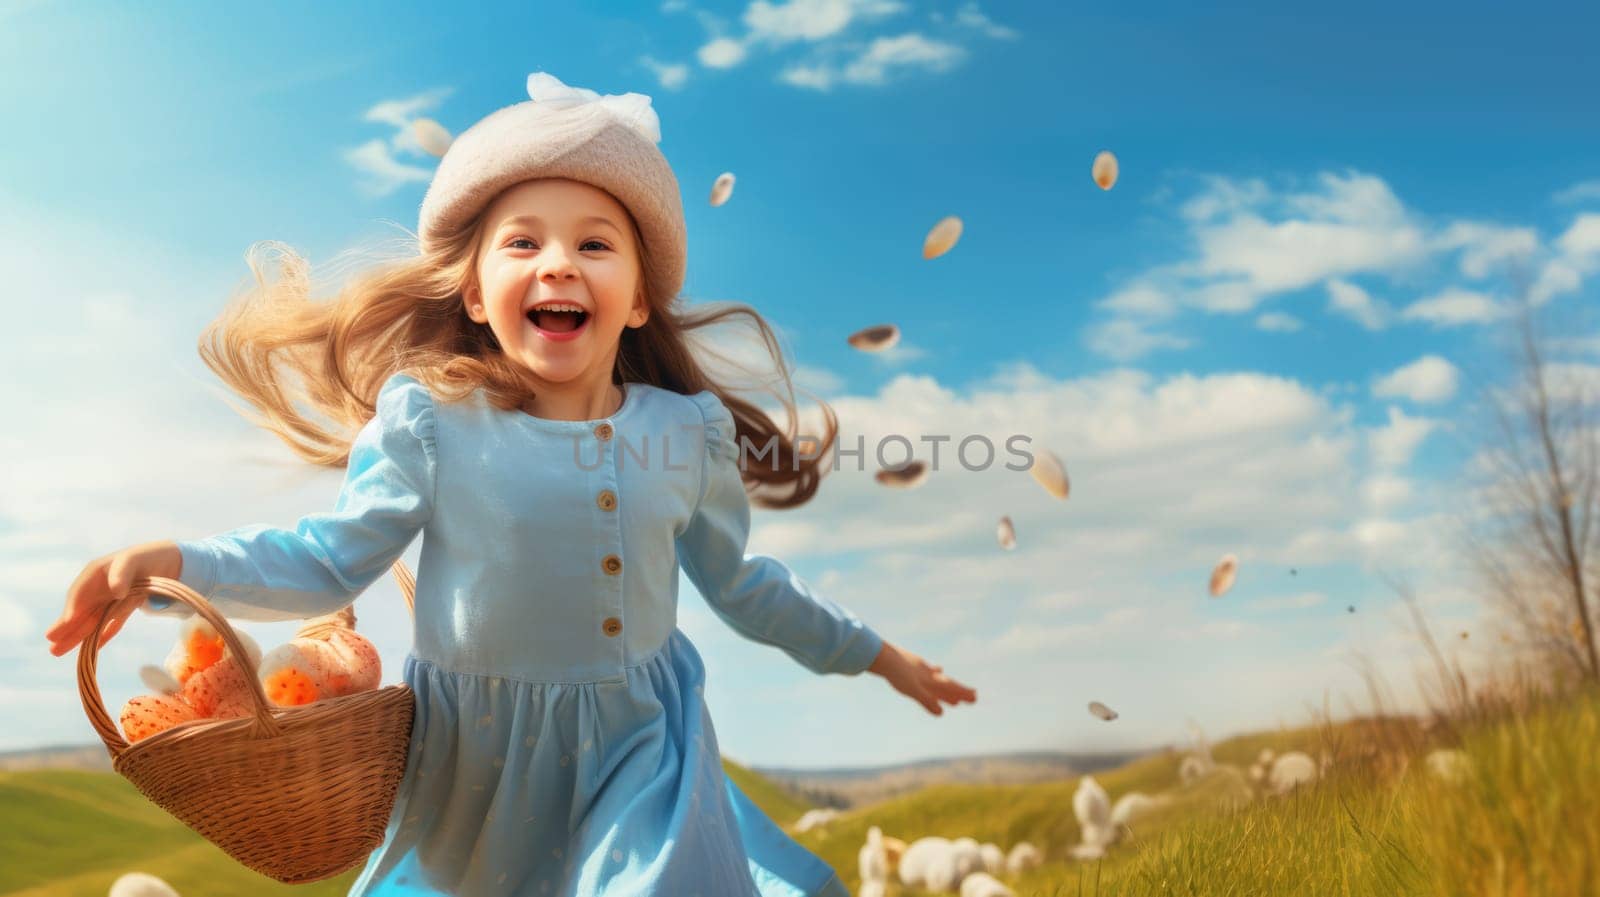 Cheerful young girl holding colorful Easter egg basket under clear blue sky on sunny spring day by JuliaDorian